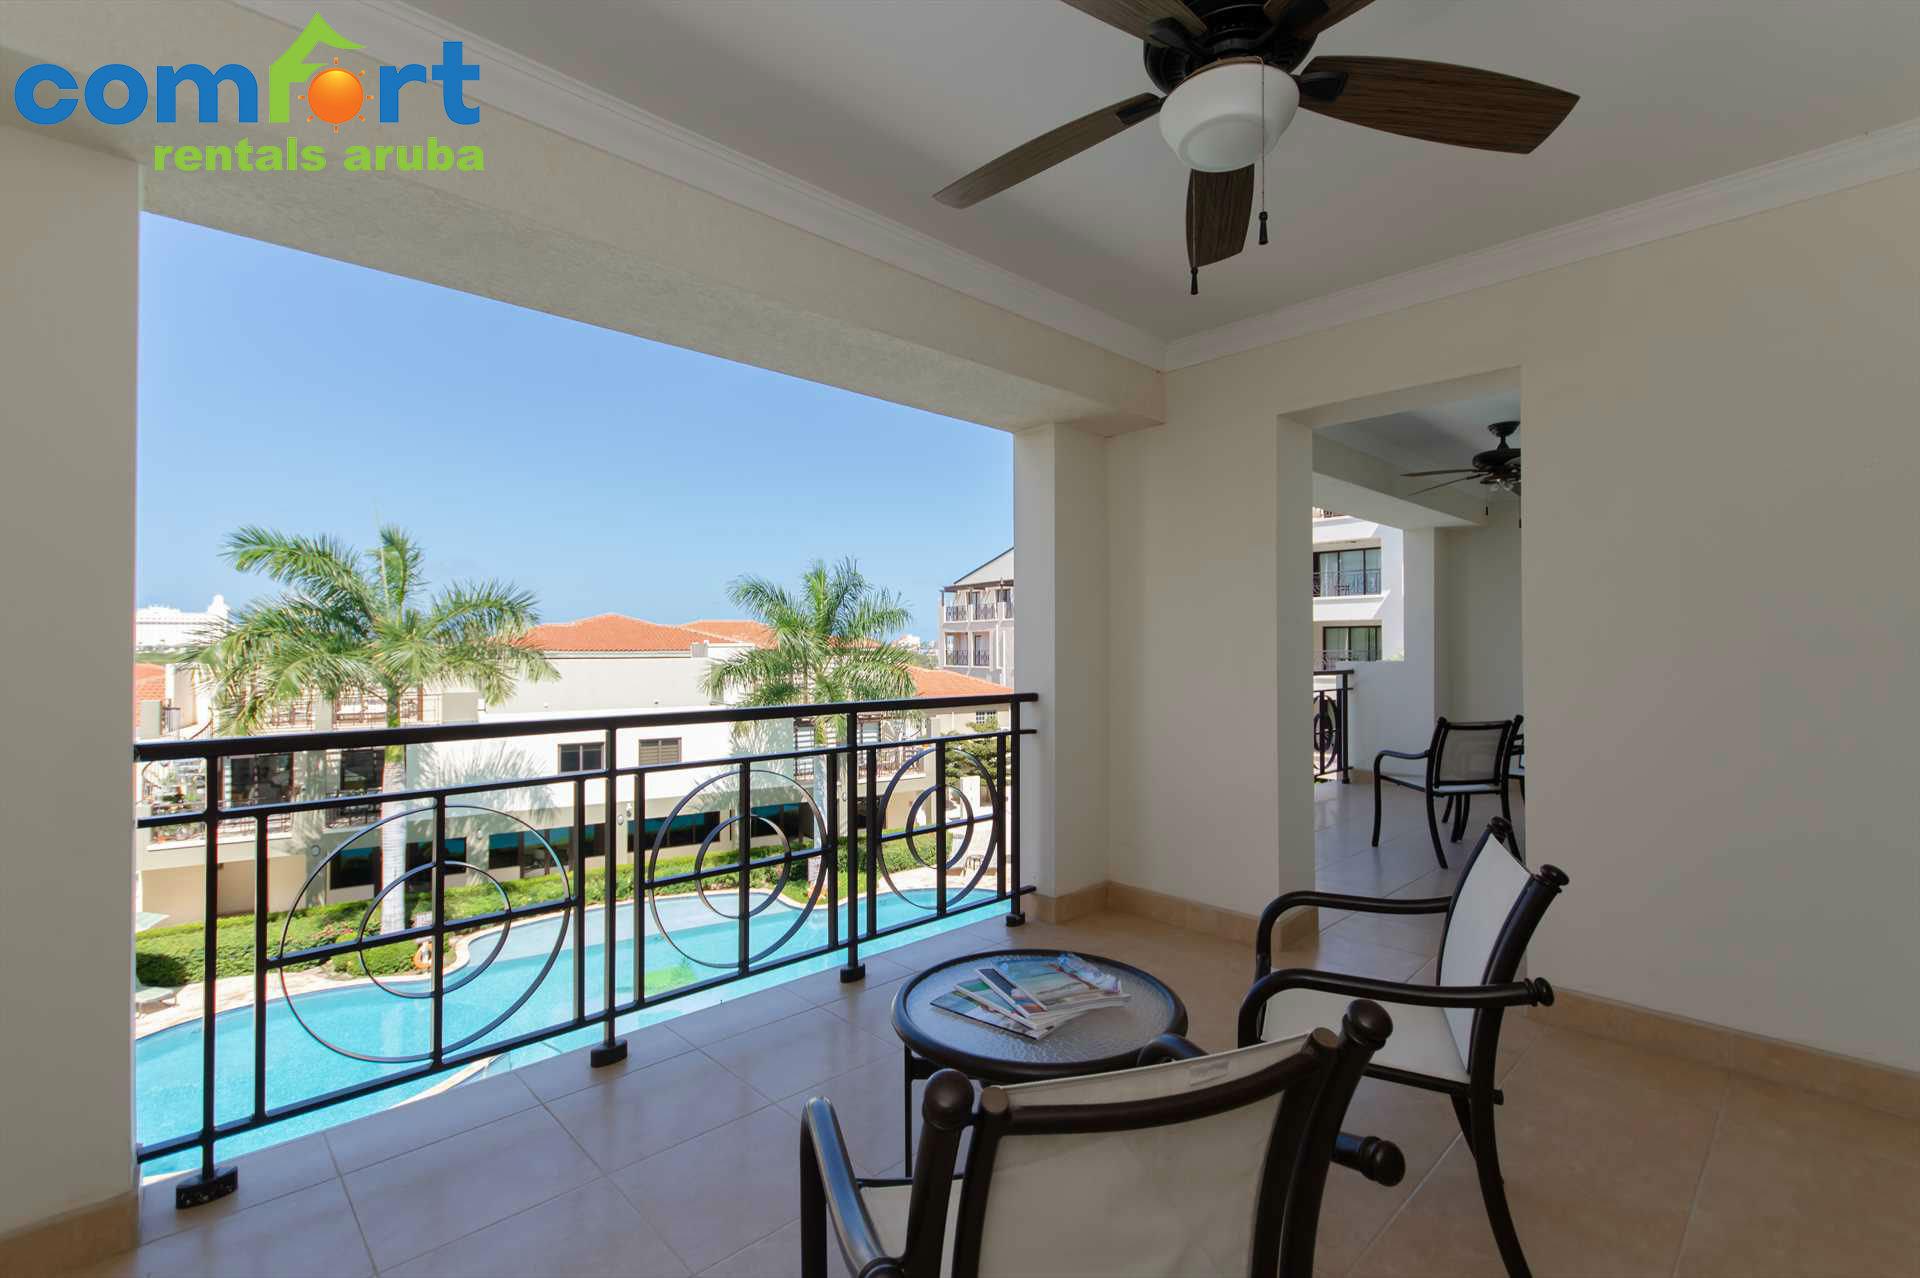 Your spacious double balcony makes for the perfect place to spend your day and night!